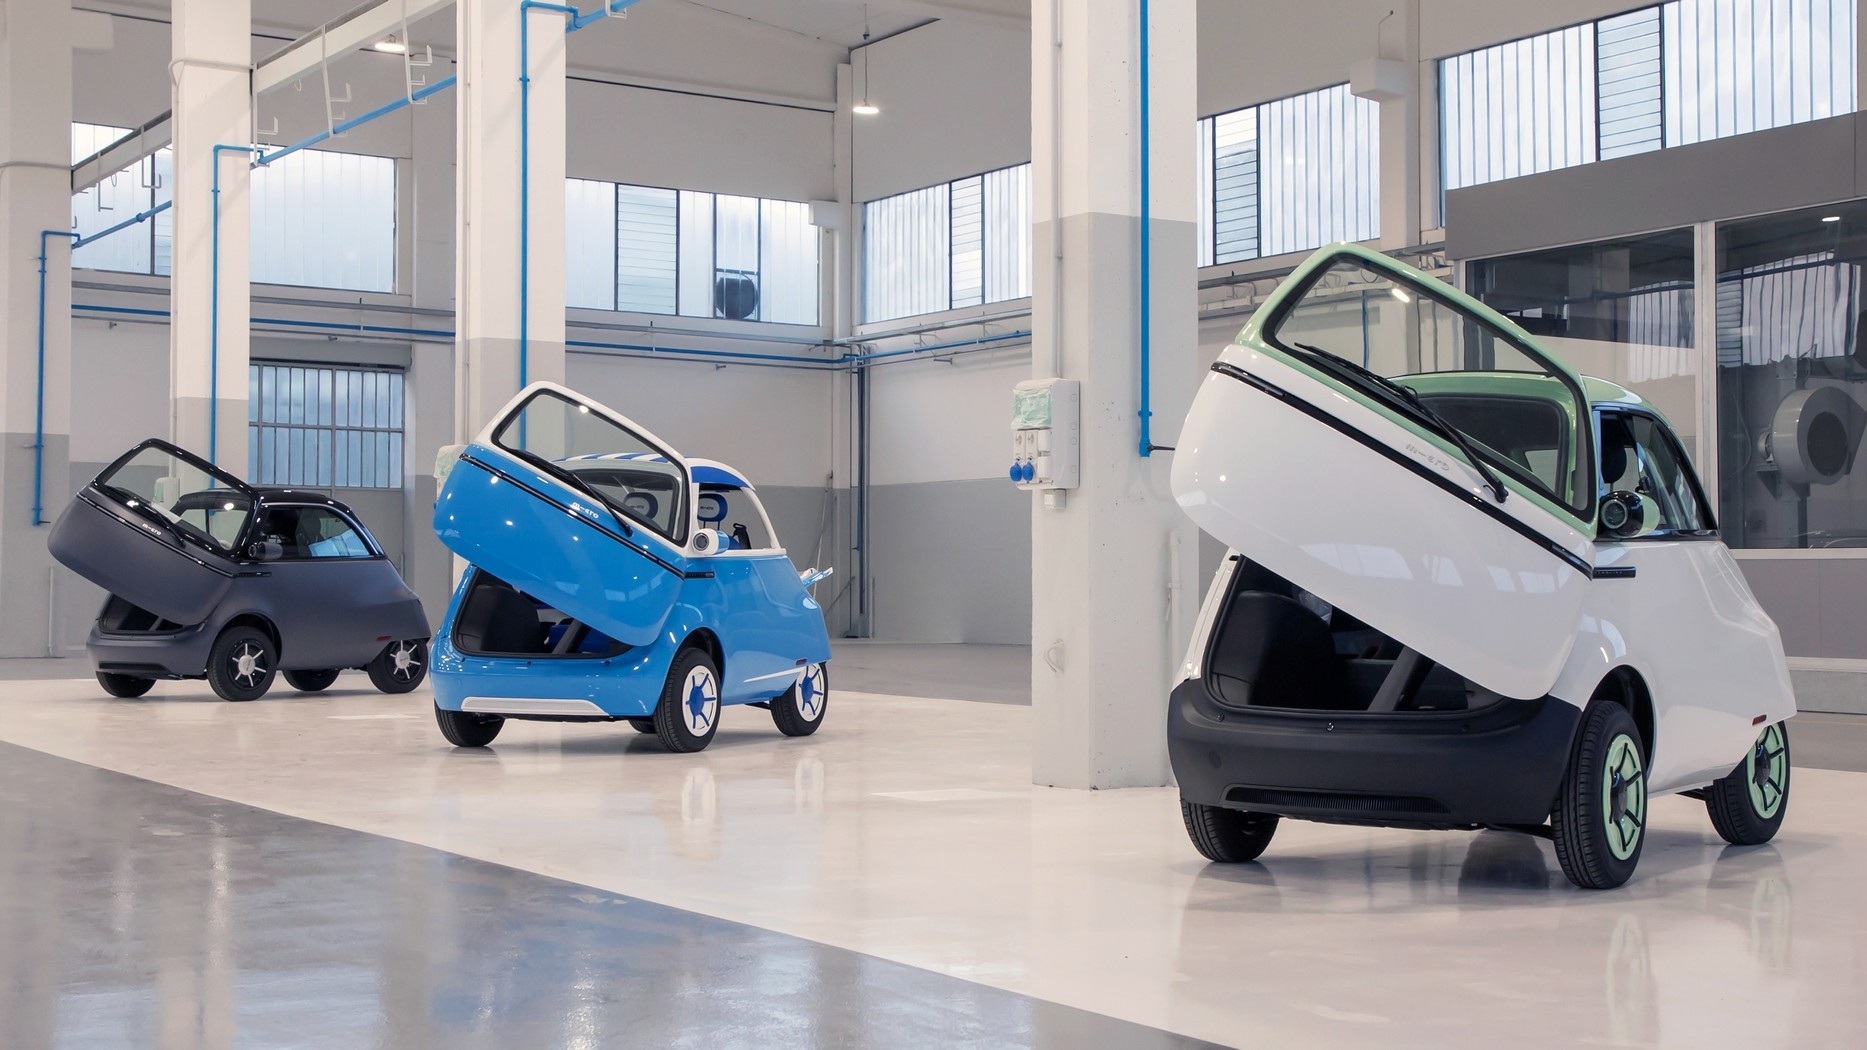 https://s1.cdn.autoevolution.com/images/news/gallery/microlino-will-have-an-l6e-version-of-the-microlino-called-lite-limited-to-45-kph-28-mph_31.jpg